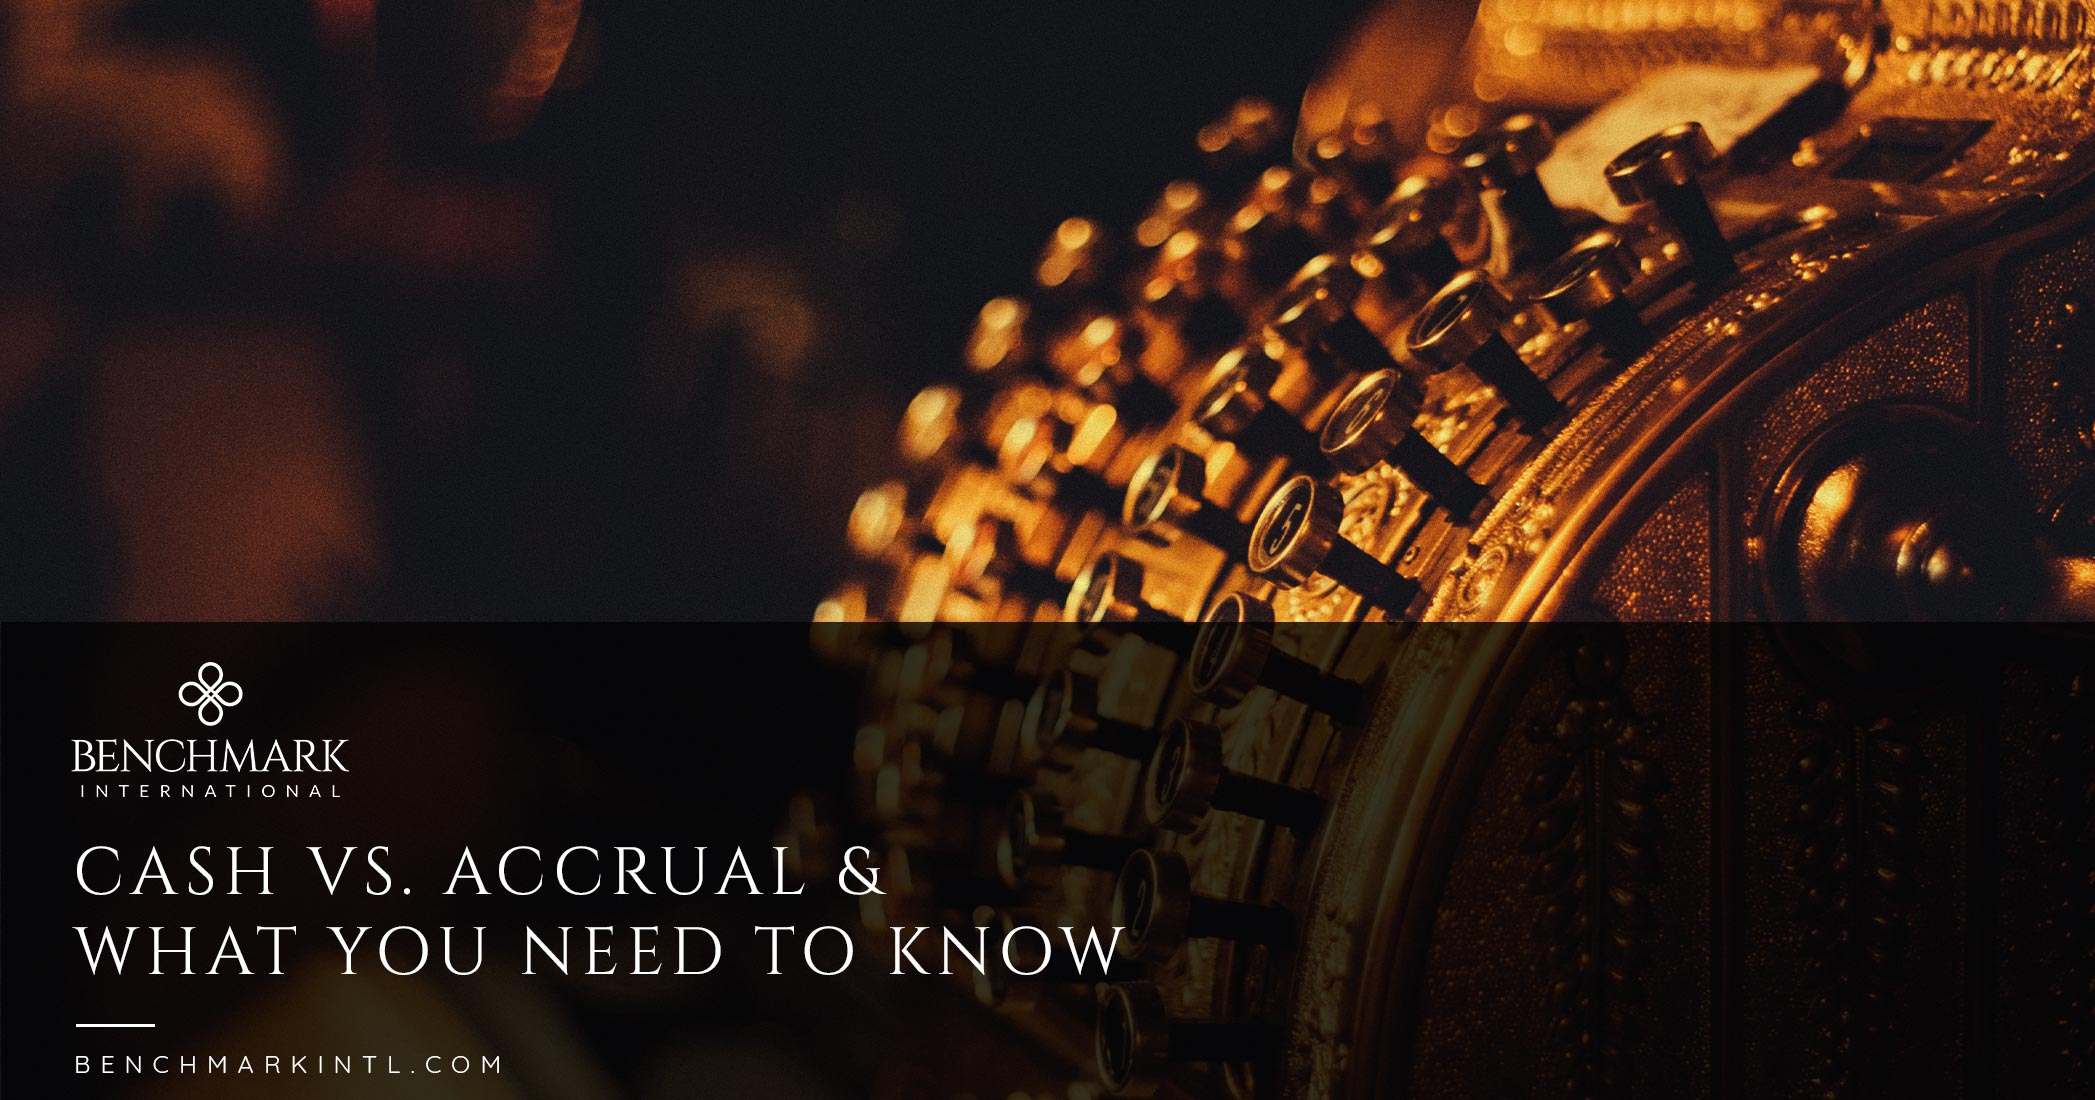 Cash Vs. Accrual & What You Need To Know